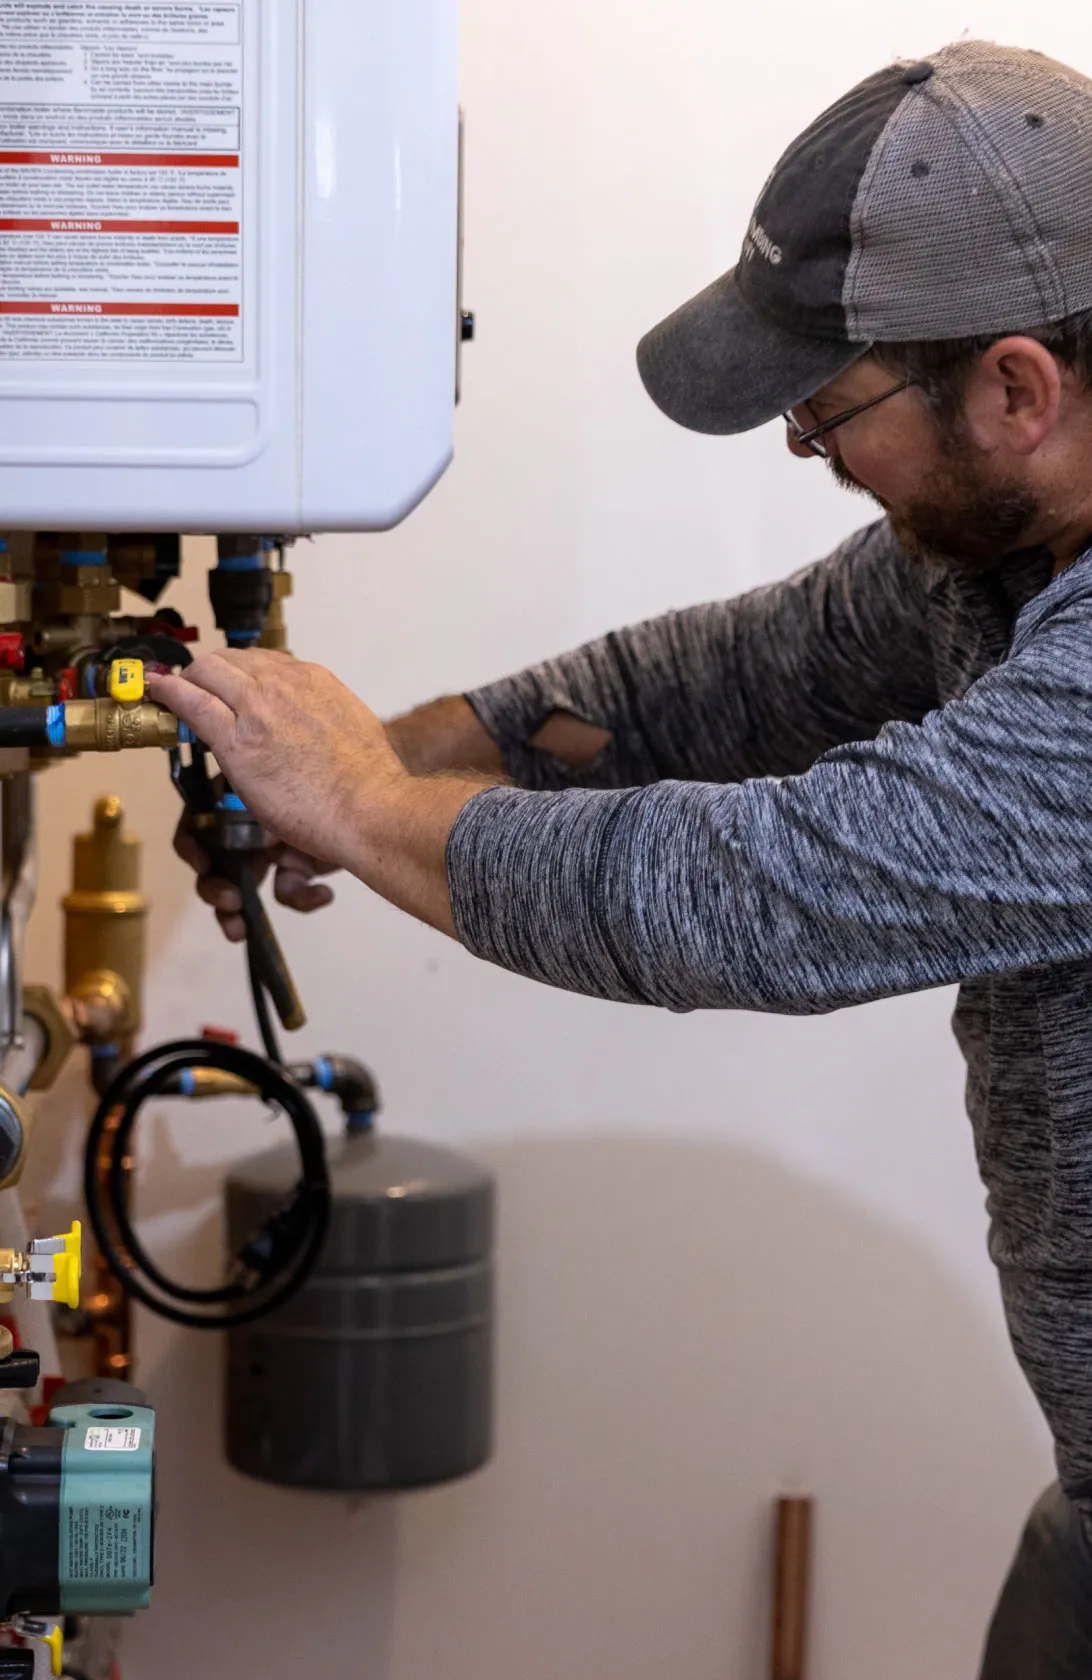 A man working on plumbing for a hot water heater.